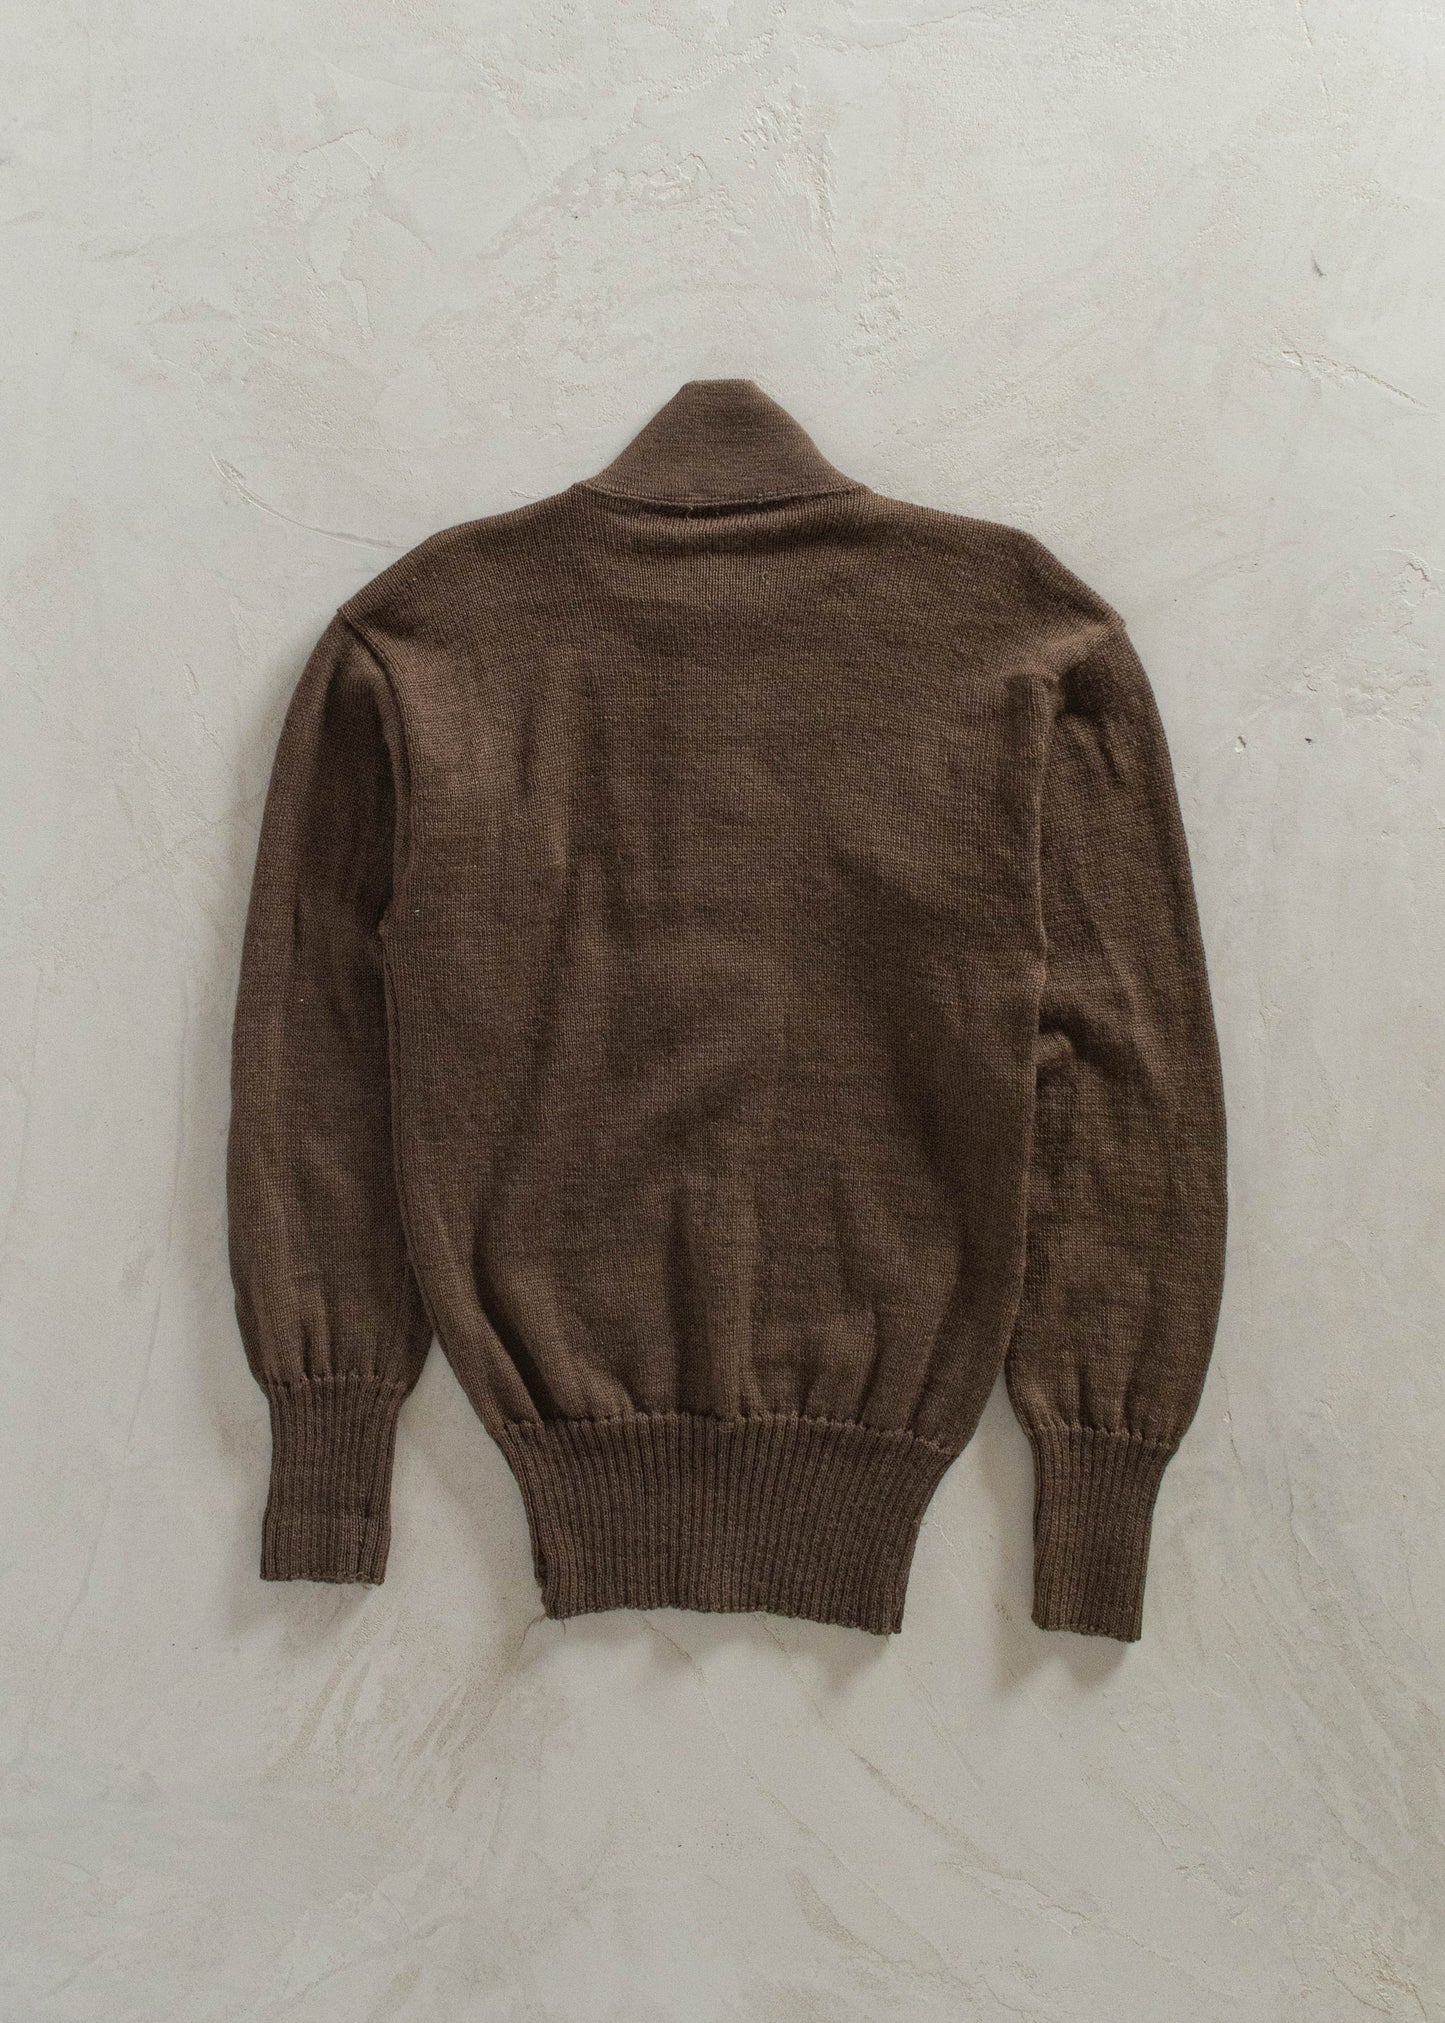 1980s Military Issue Wool Pullover Knit Size XS/S